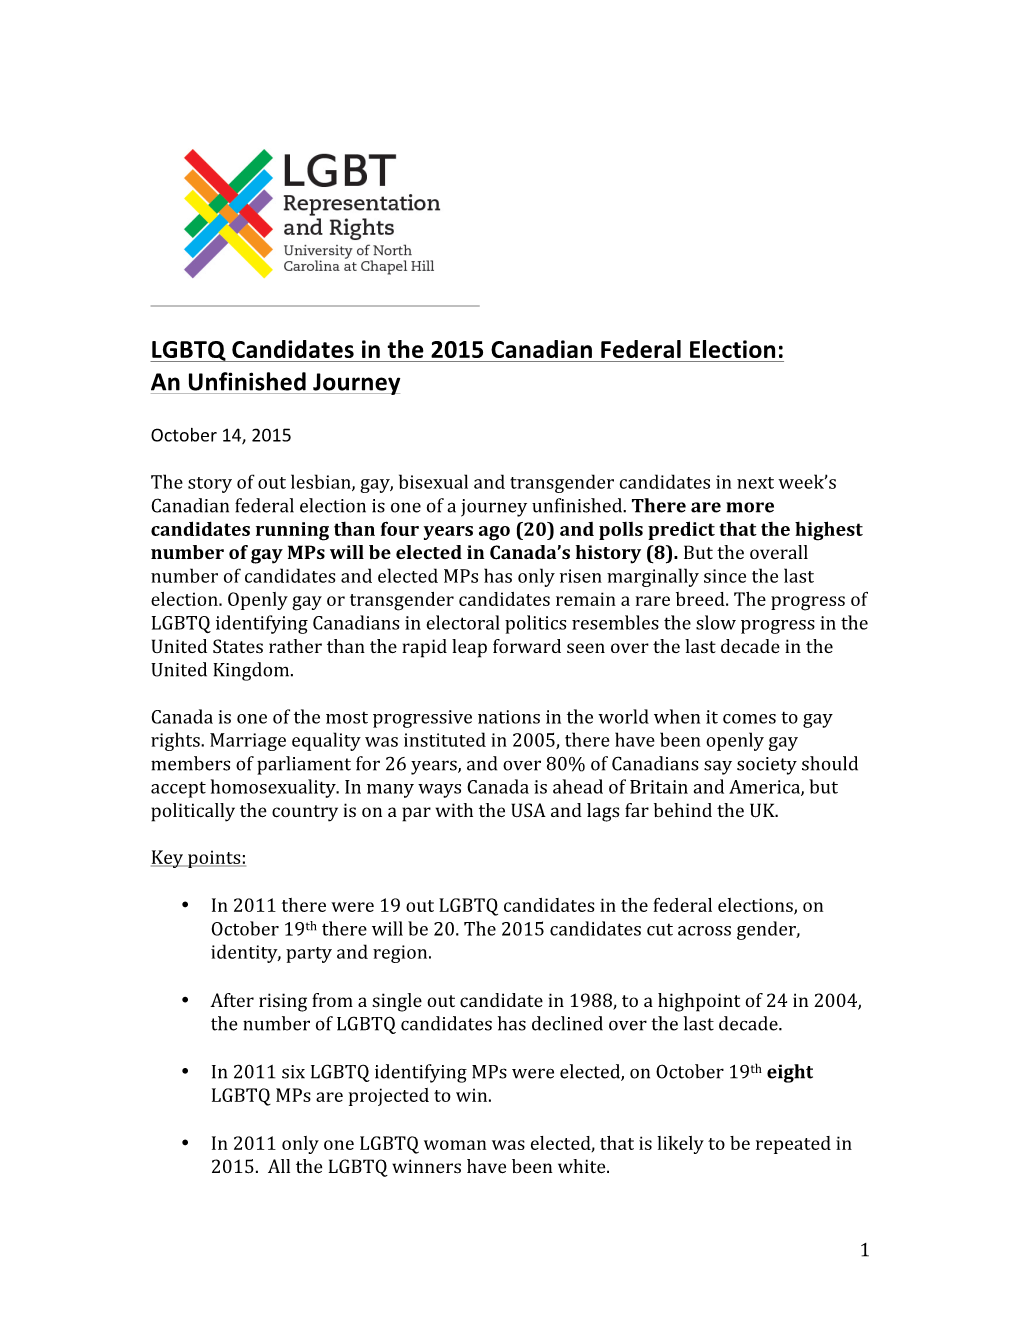 LGBTQ Candidates in the 2015 Canadian Federal Election: an Unfinished Journey